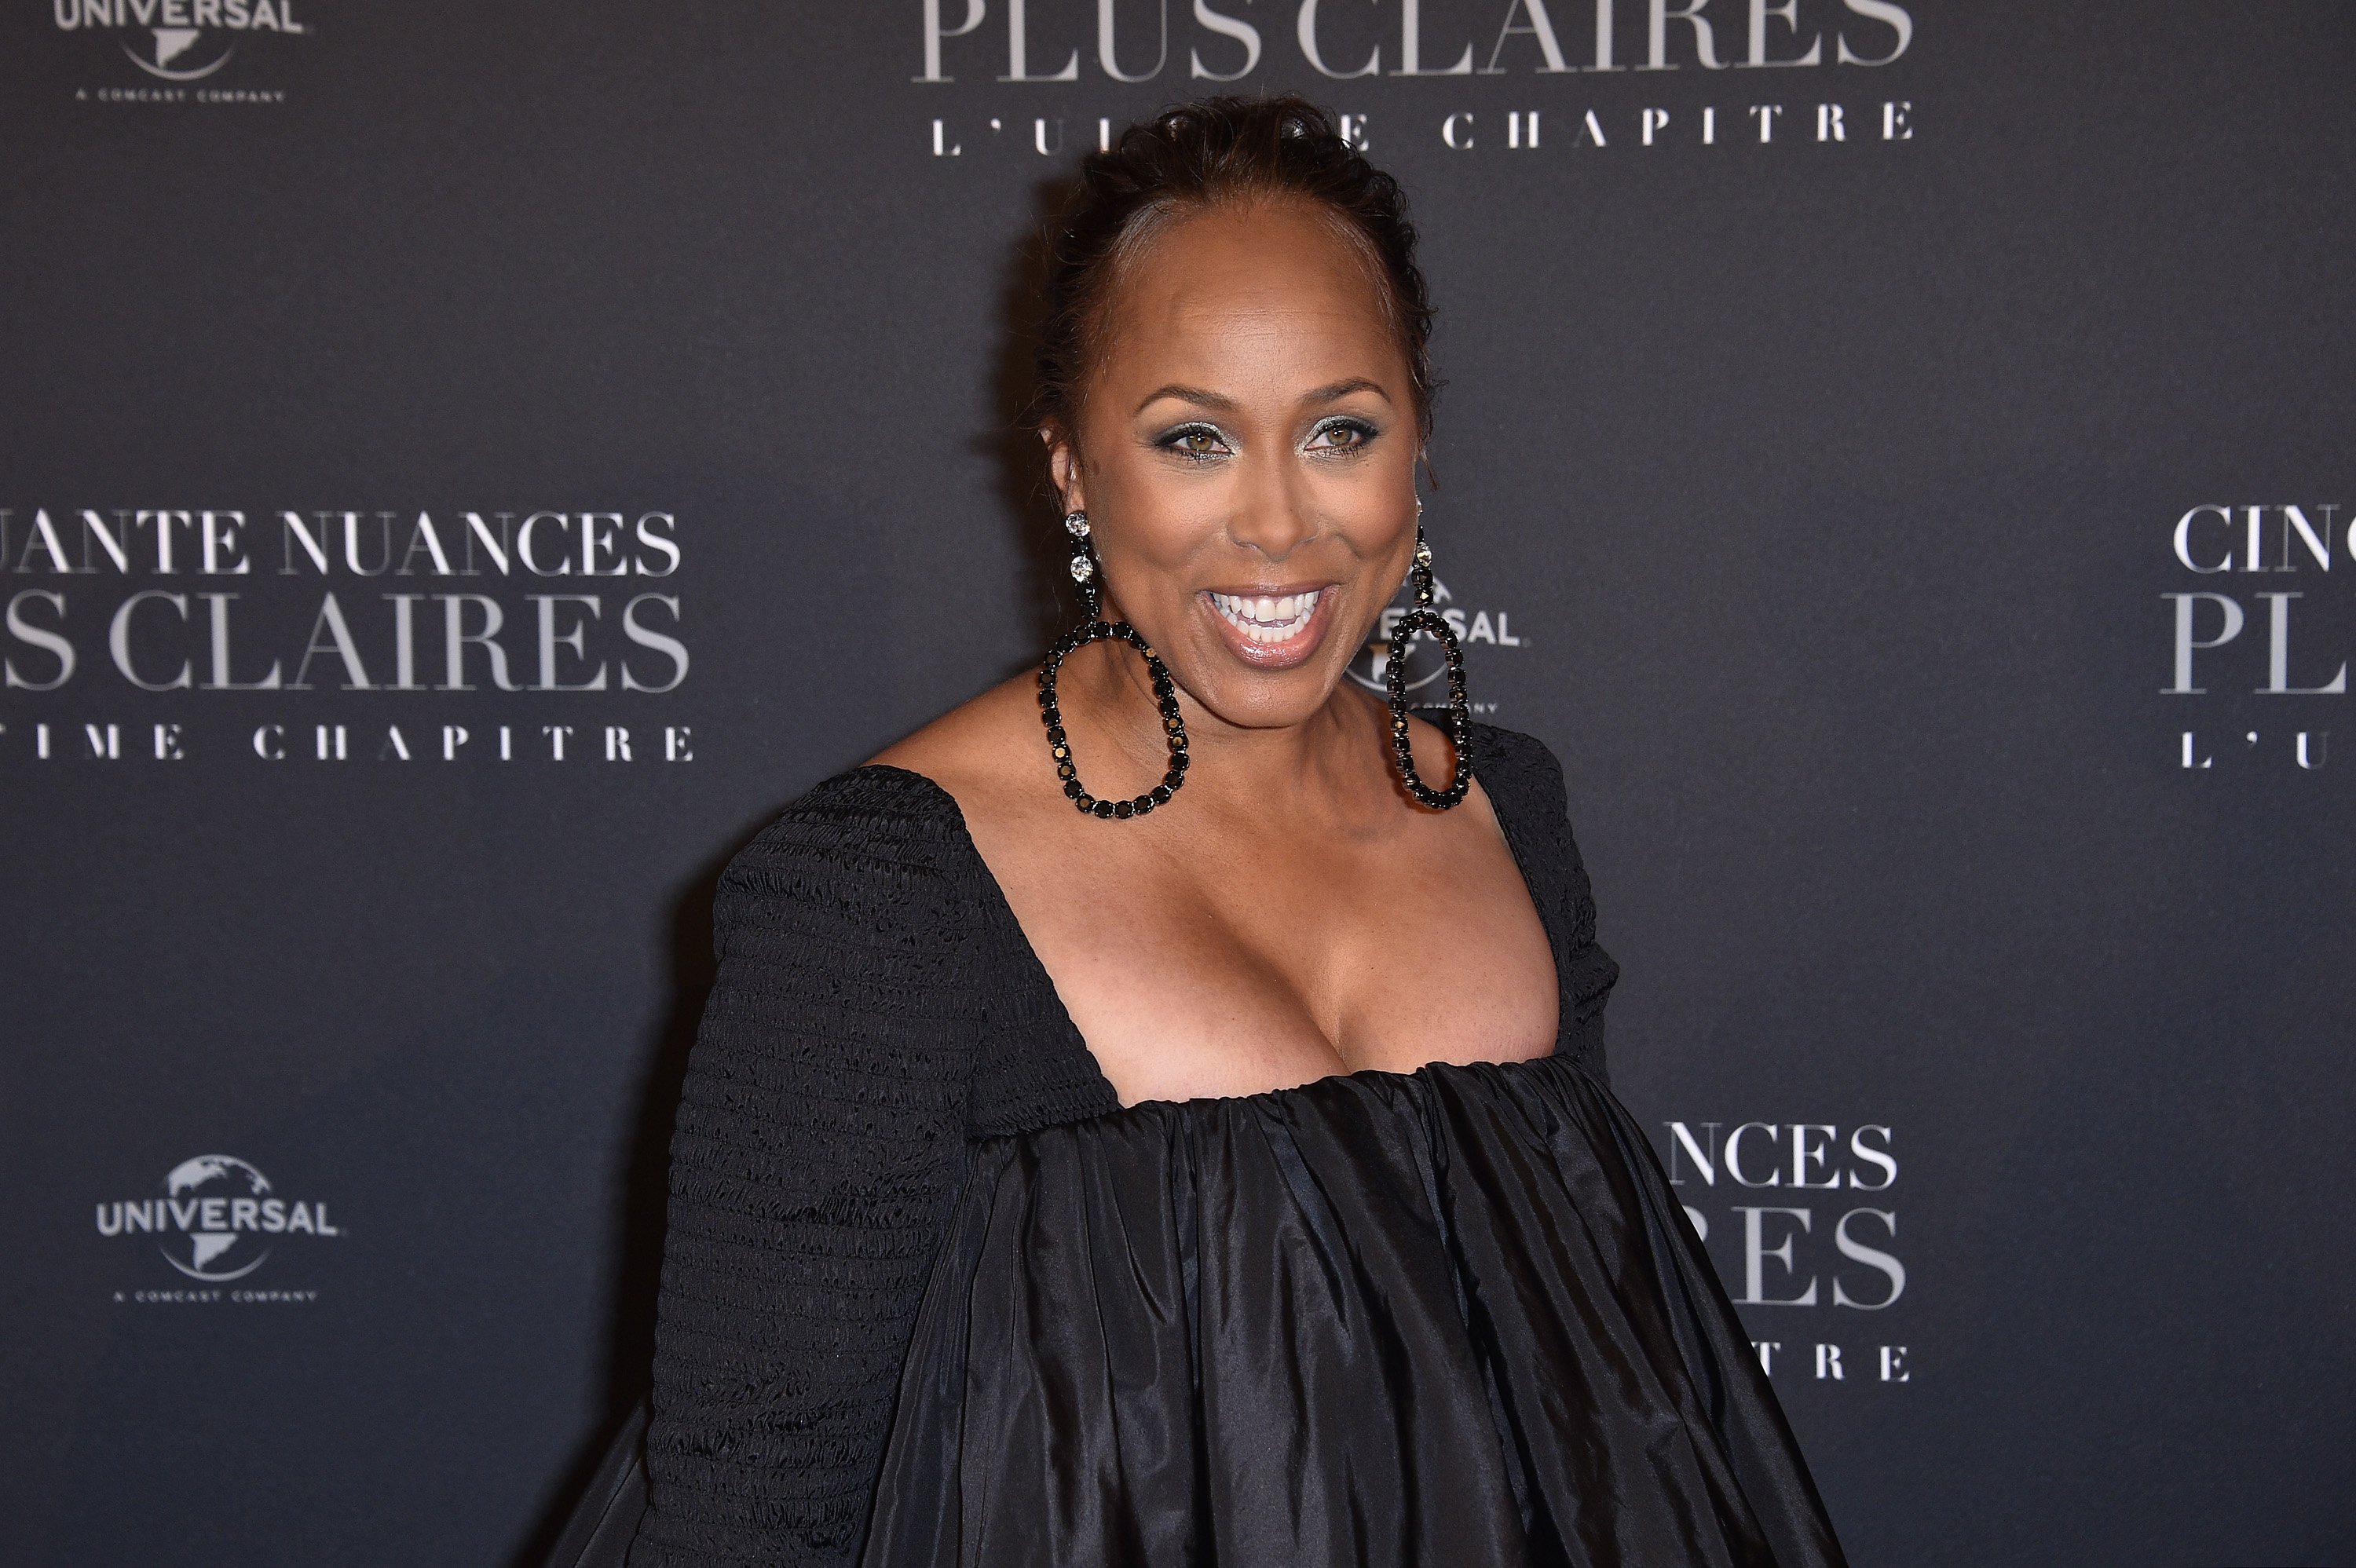 Marjorie Harvey poses at the Paris premiere of "Fifty Shades Freed - 50 Nuances Plus Clair" on February 6, 2018 in Paris, France. | Source: Getty Images